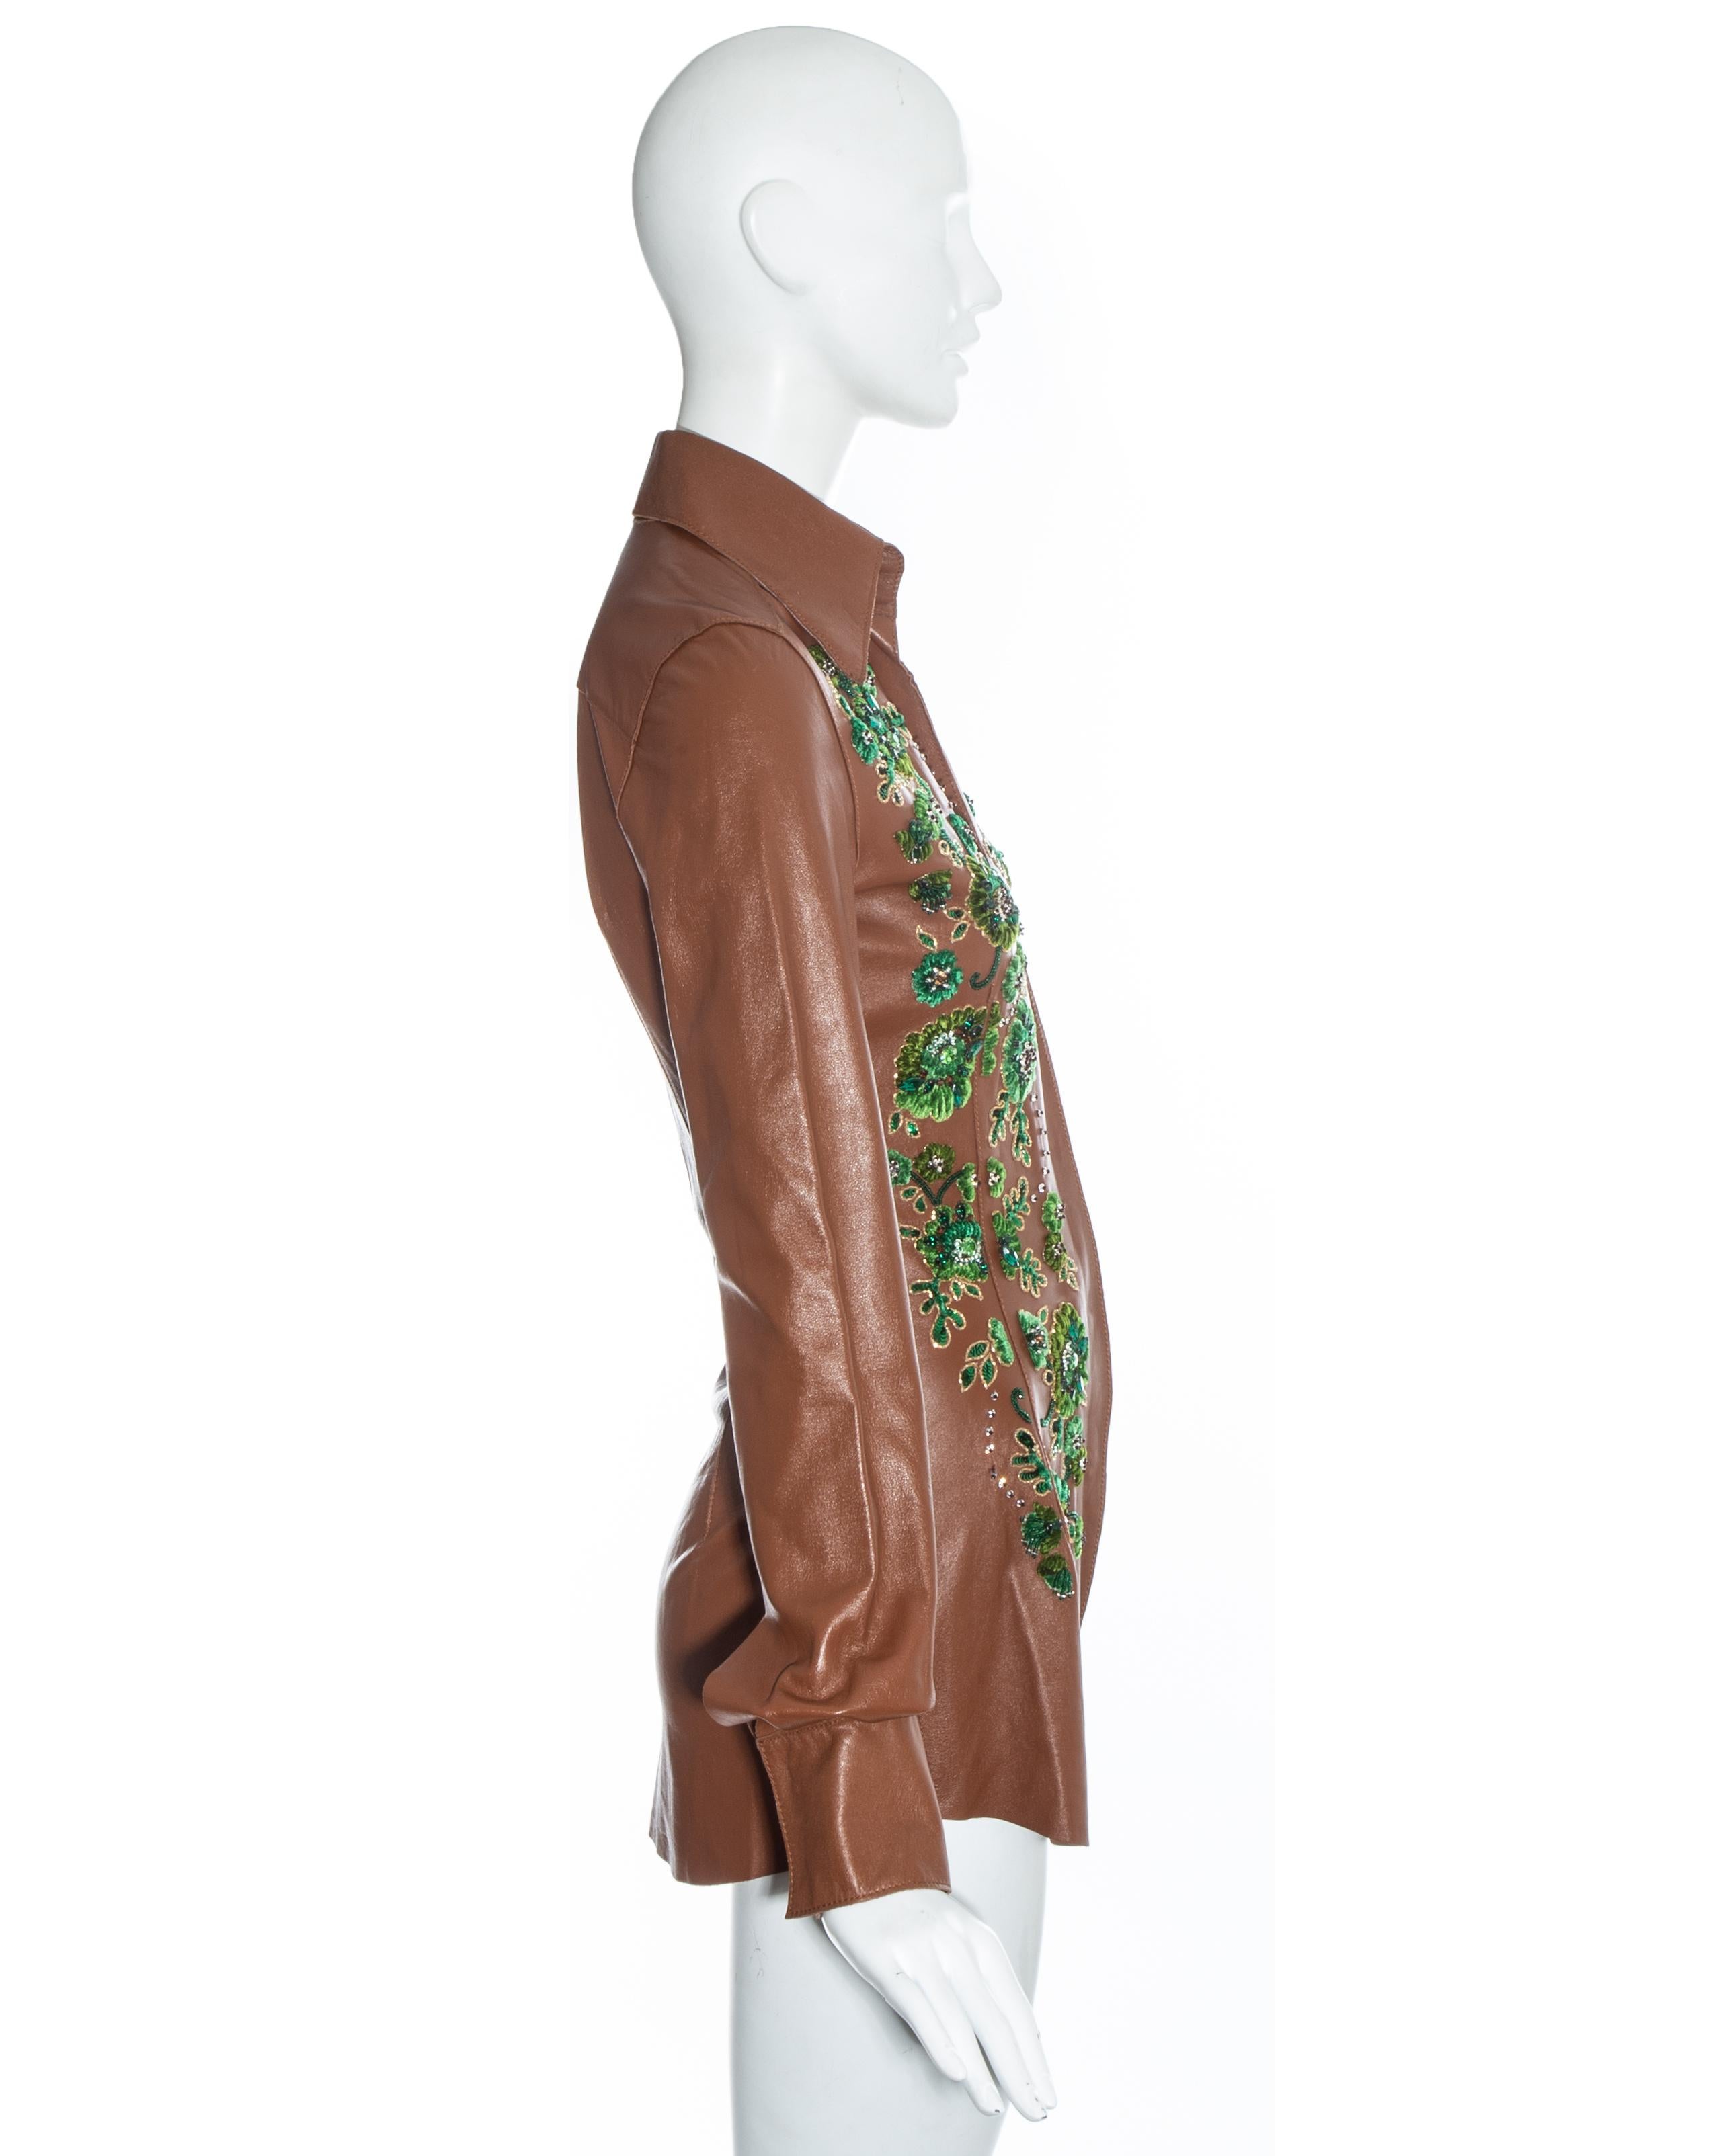 Dolce & Gabbana brown leather embellished blouse, ss 2001 In Excellent Condition For Sale In London, GB